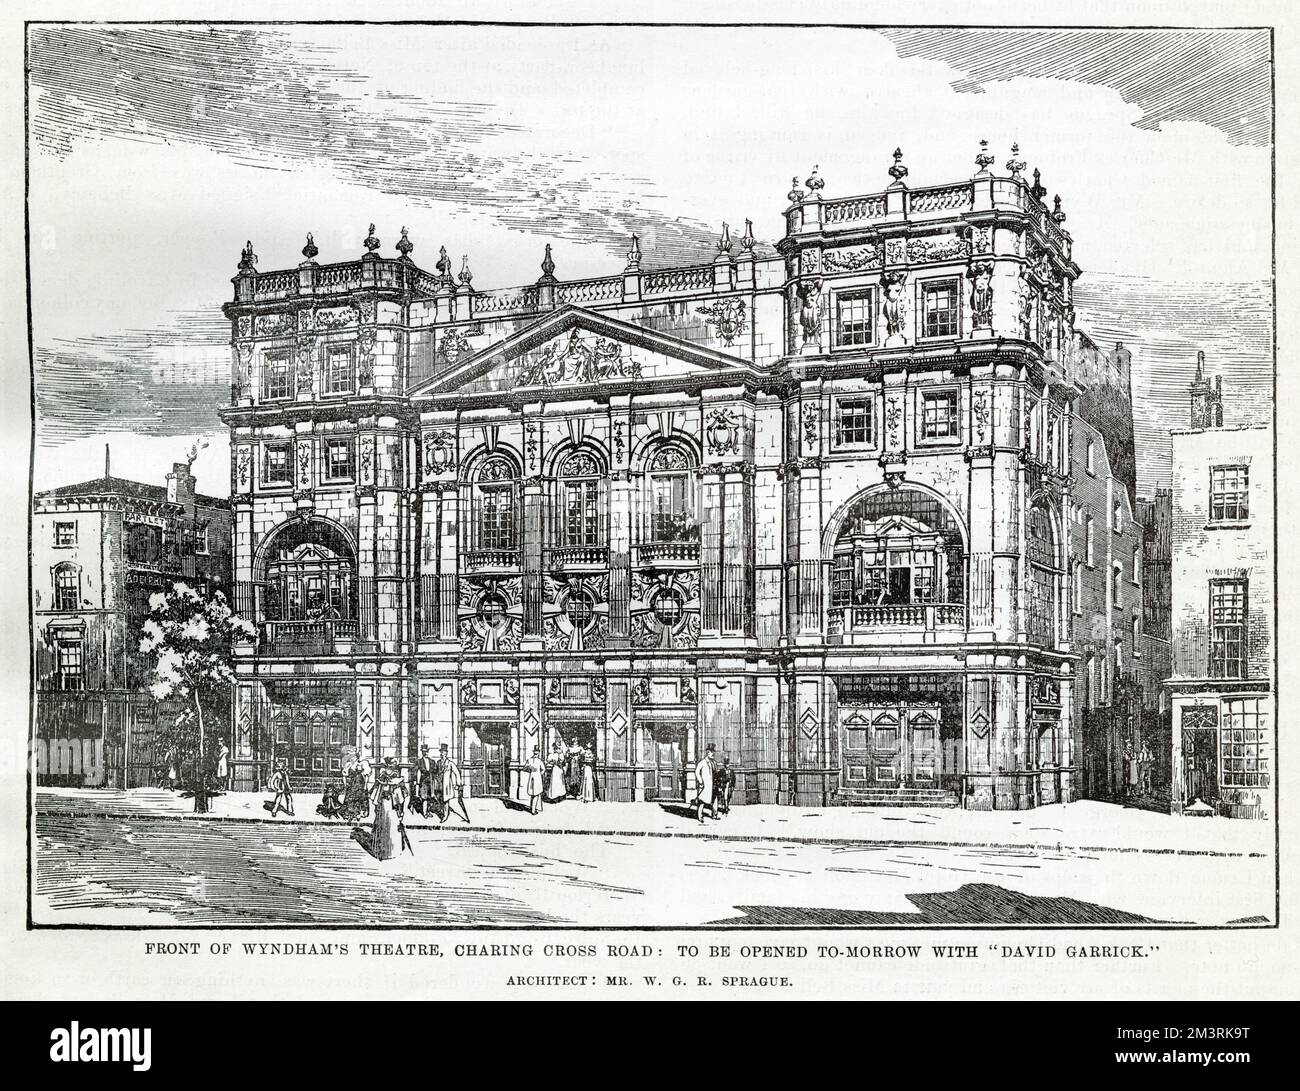 Front of Wyndham's Theatre, Charing Cross Road, London designed by the architect, Mr W. G. R. Sprague, opened by Charles Wyndham in 1899.     Date: 1899 Stock Photo